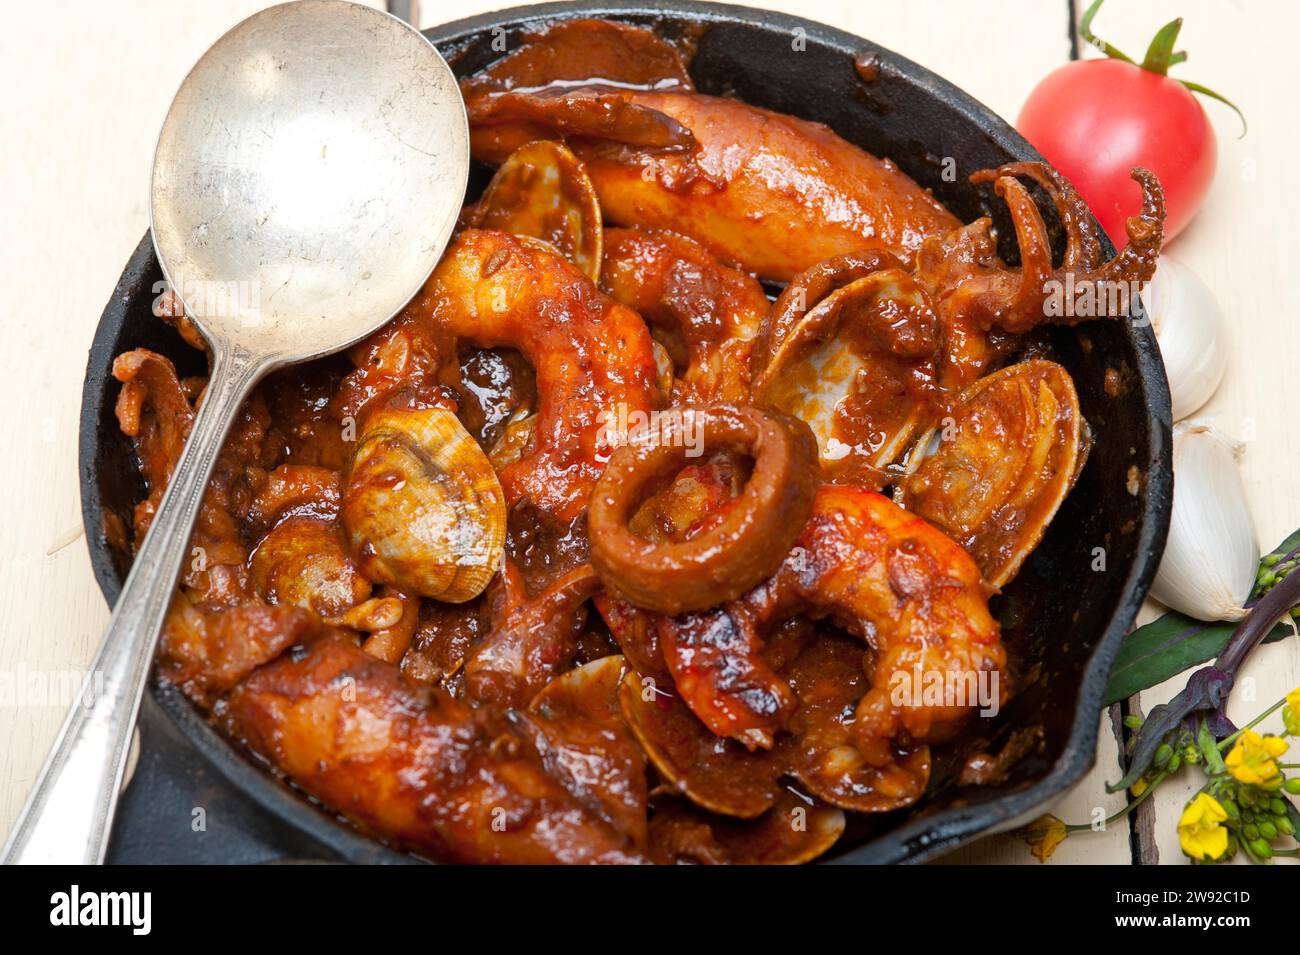 Fresh seafood stew prepared on an iron skillet ove white rustic wood table, Food photography Stock Photo